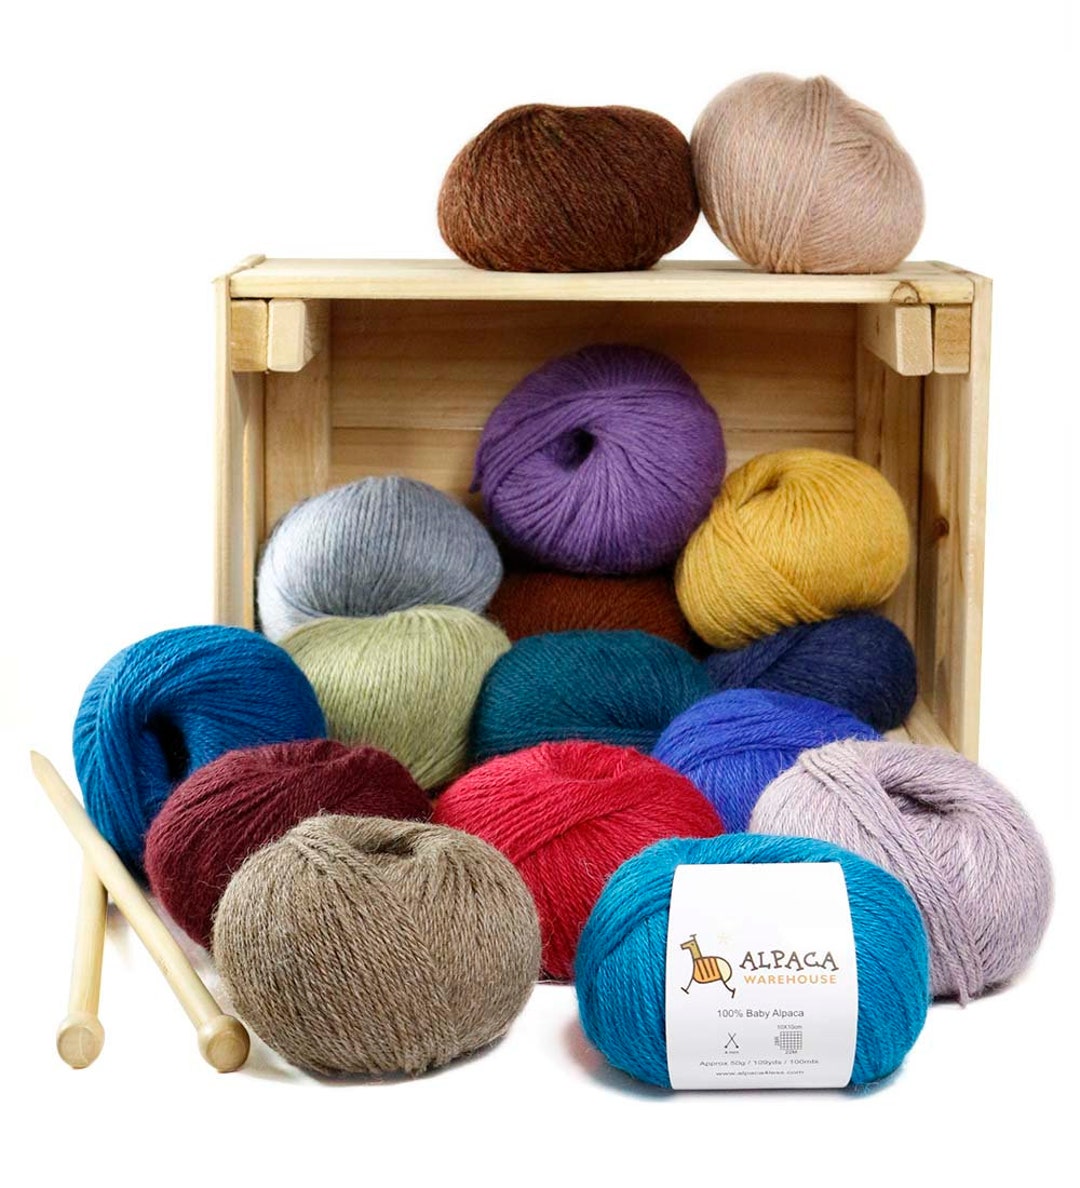 100% Baby Alpaca Yarn Wool Set of 3 Skeins DK Weight - Made in Peru -  Heavenly Soft and Perfect for Knitting and Crocheting (Burgundy, DK)